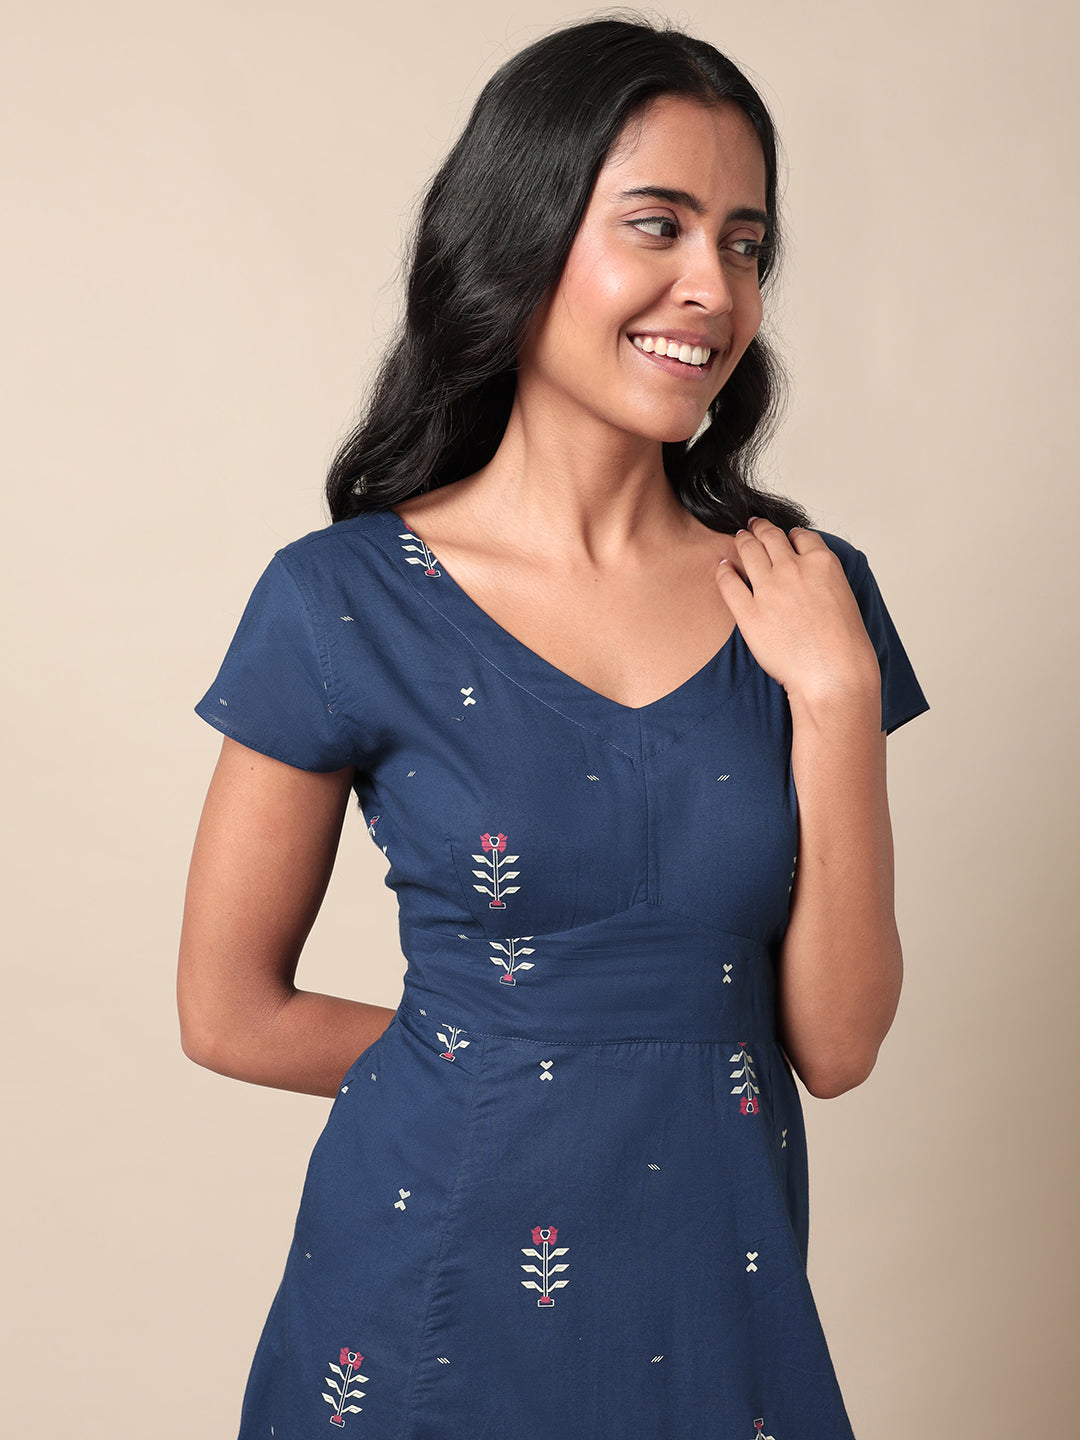 Roohi Printed Navy Blue Dress With Back Tie Up